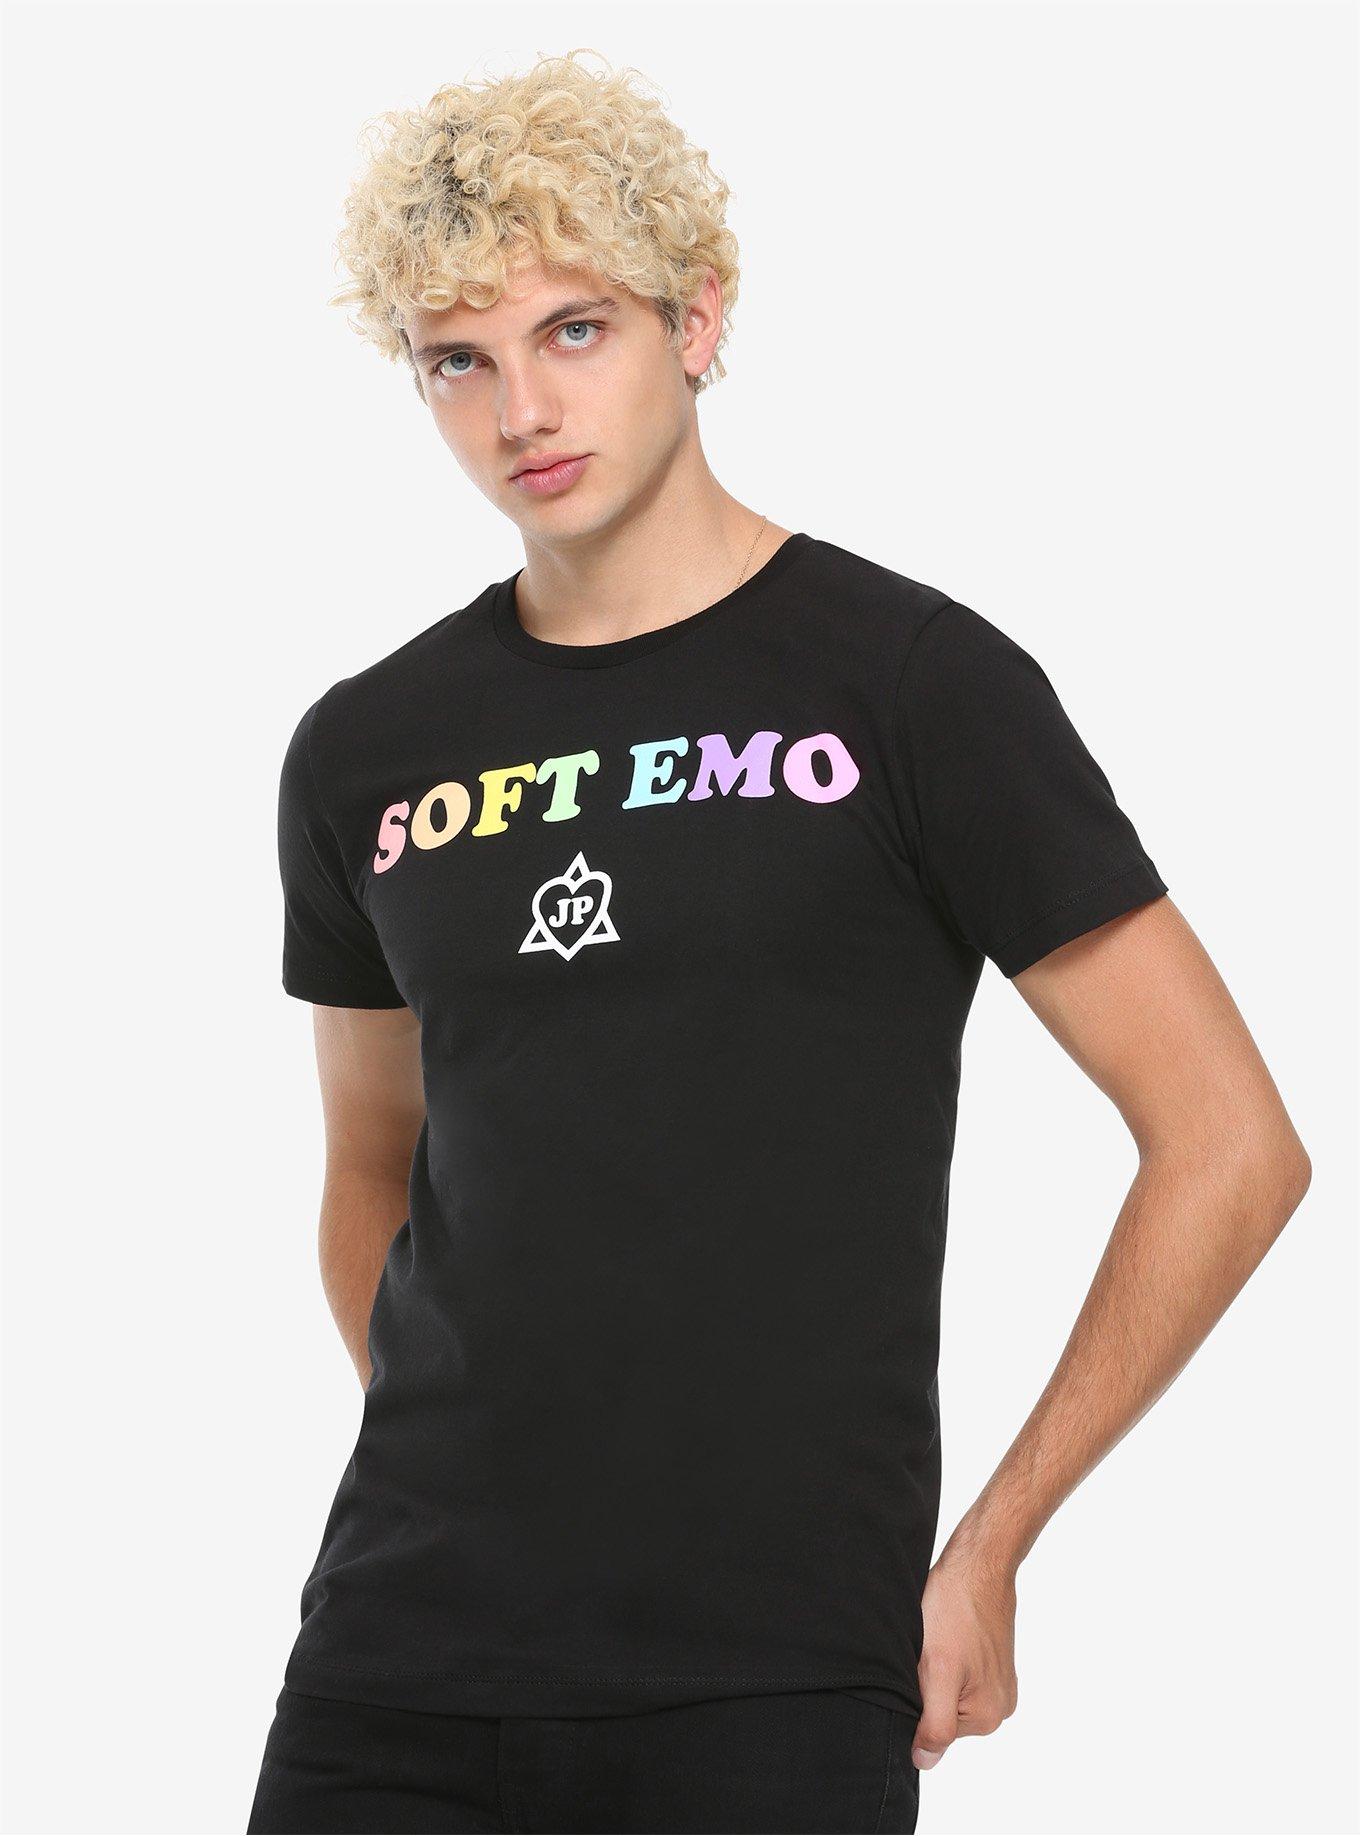 Jessie Paege Soft Emo T-Shirt Hot Topic Exclusive, , alternate